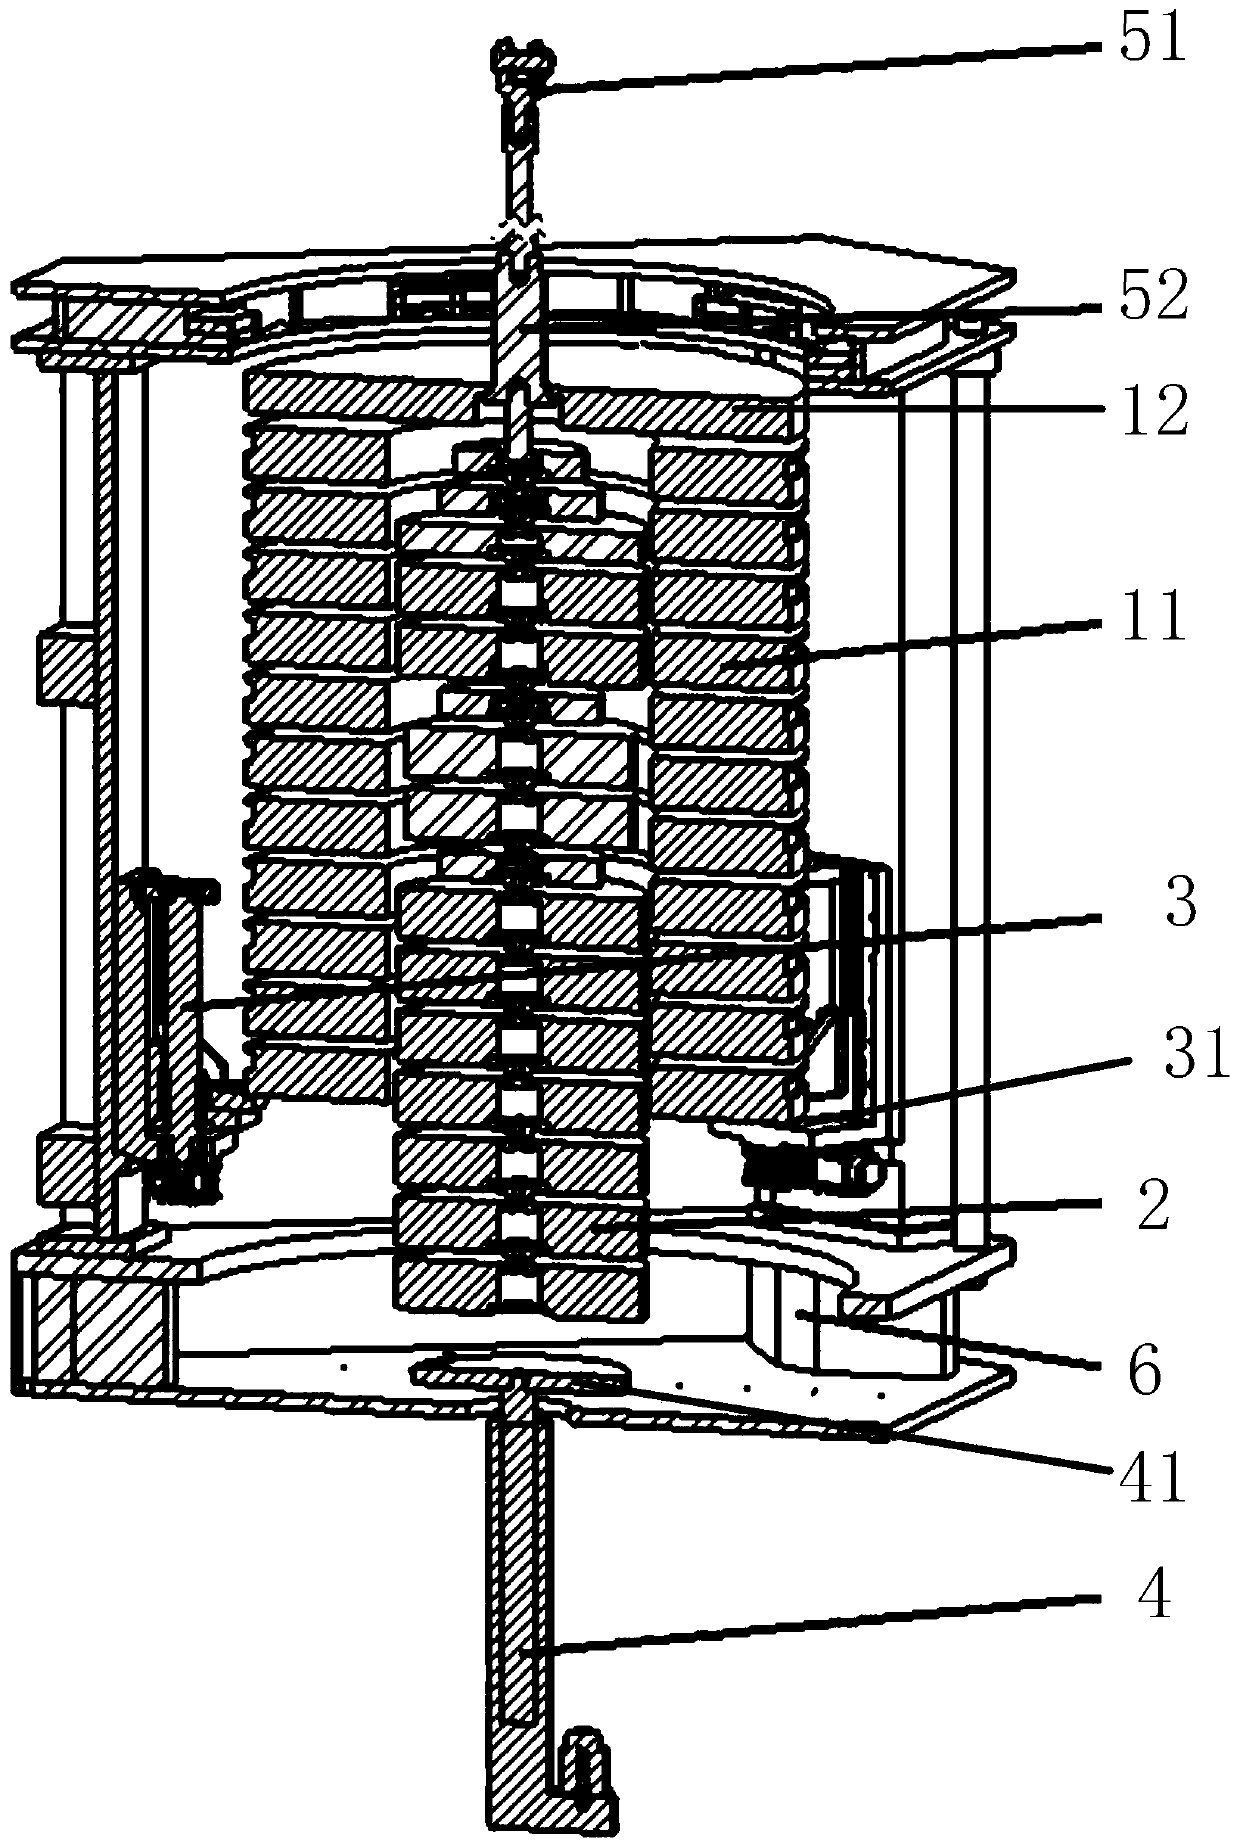 A nested electronic crane scale weight loading system